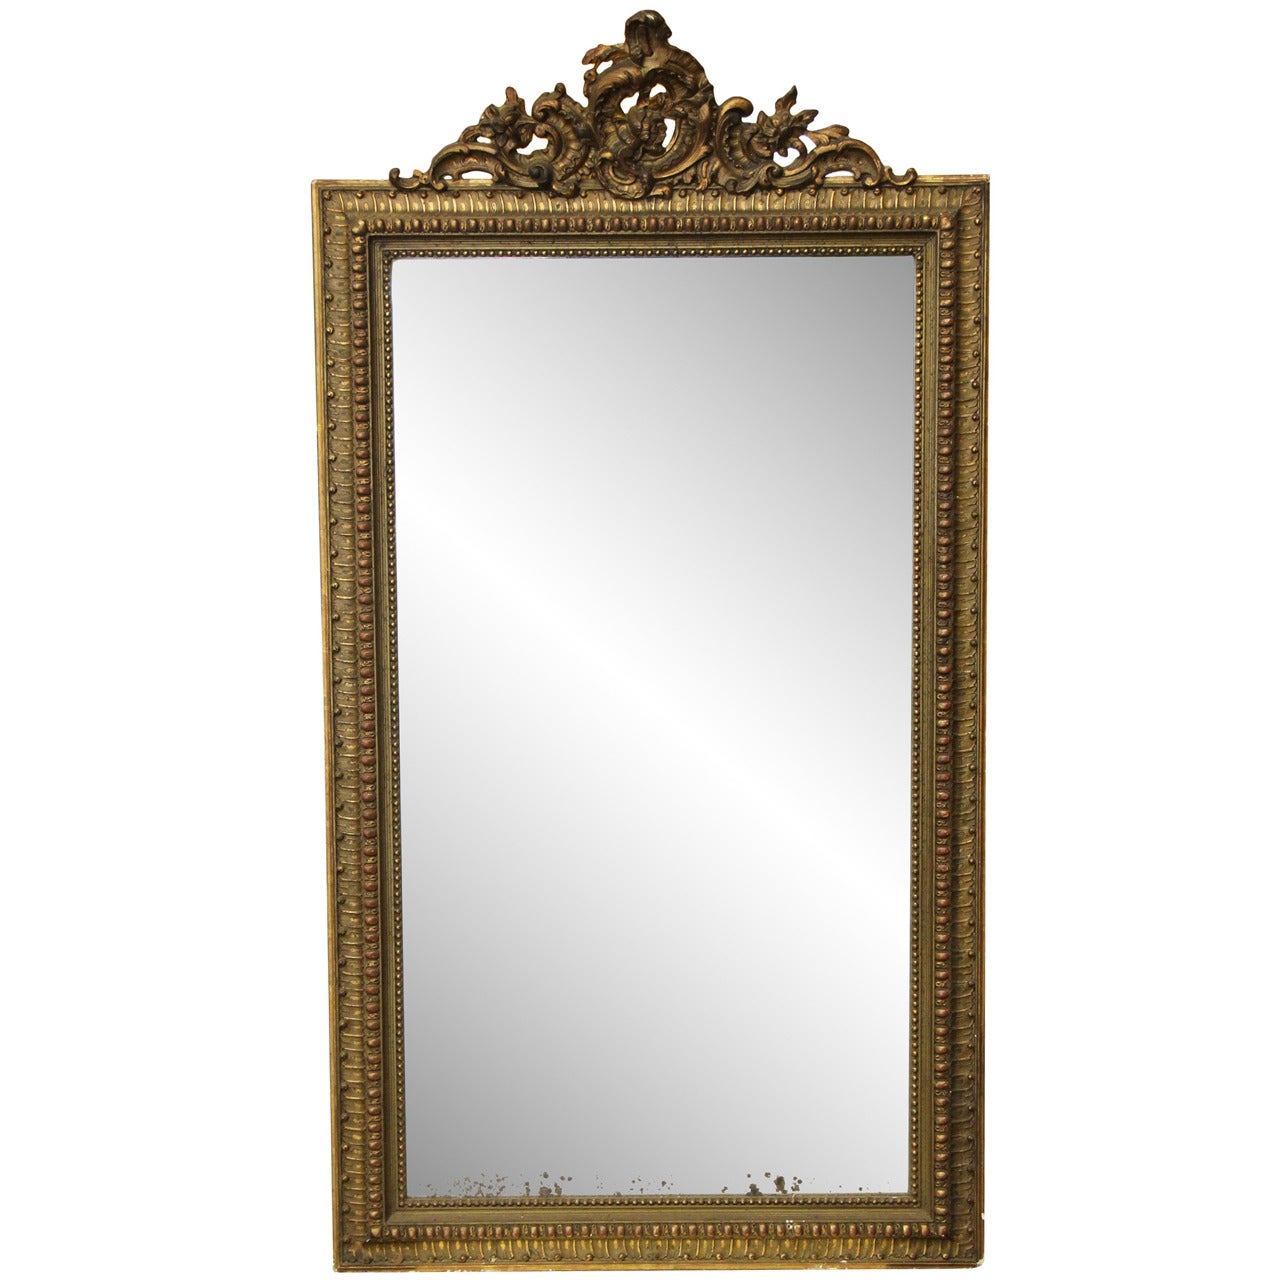 1890s French Mirror Done in the Louis XV Style